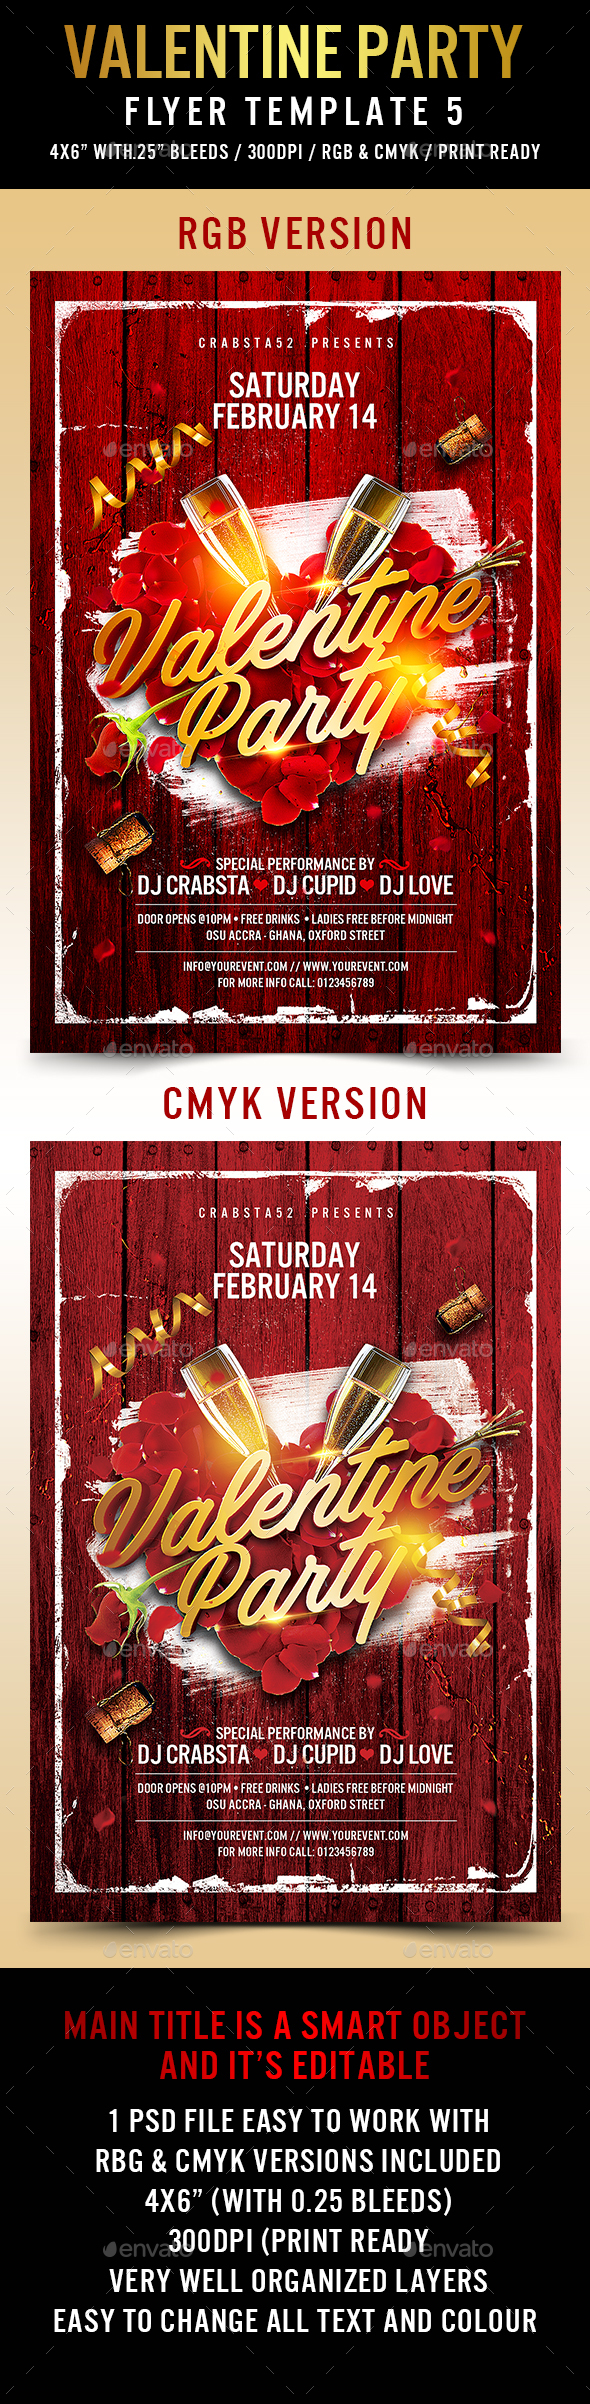 Valentine Party Flyer Template 5